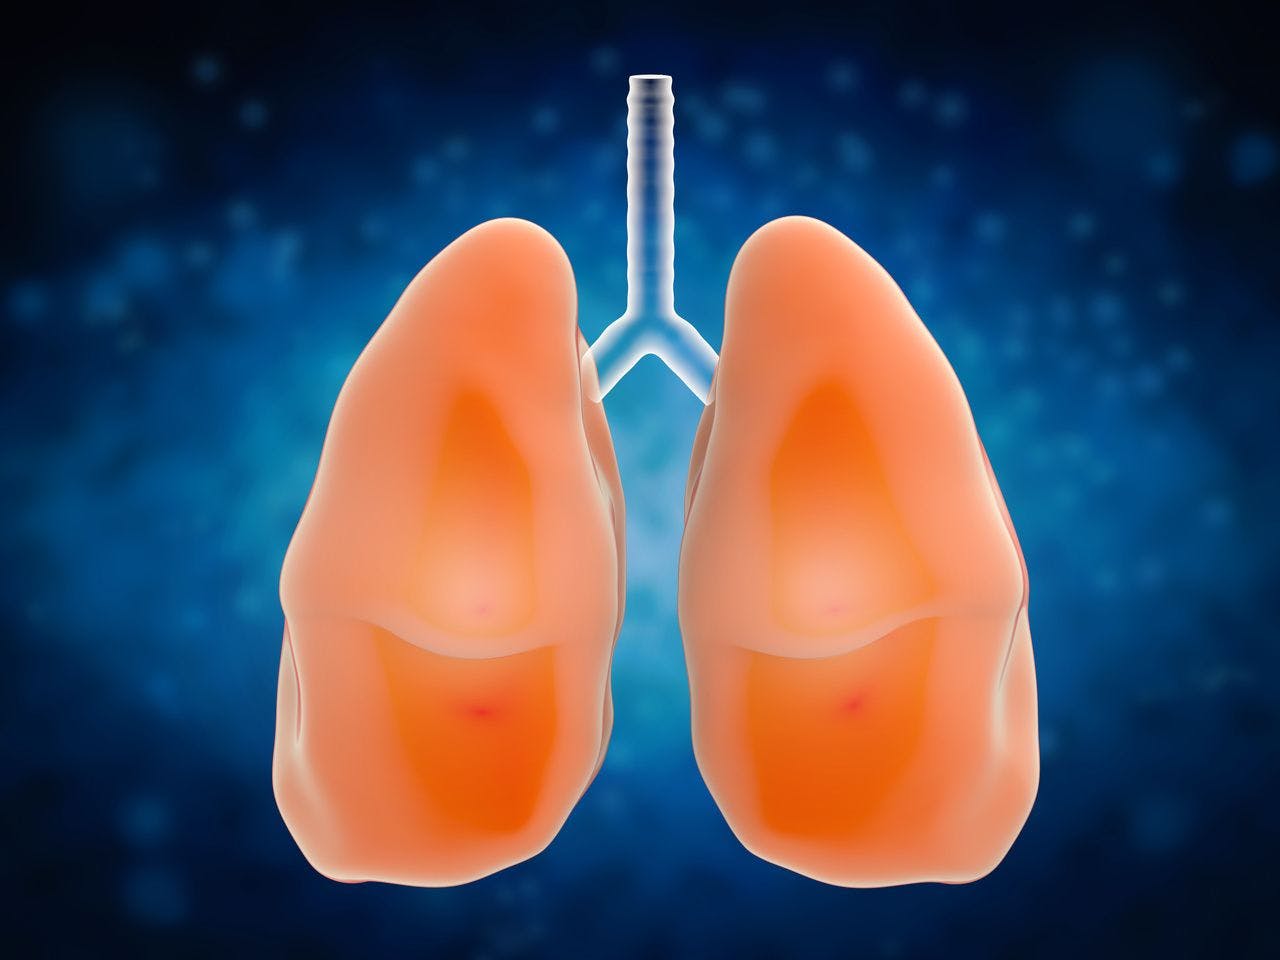 Researchers Explore Benefits of Using Composite End Points in COPD Trials